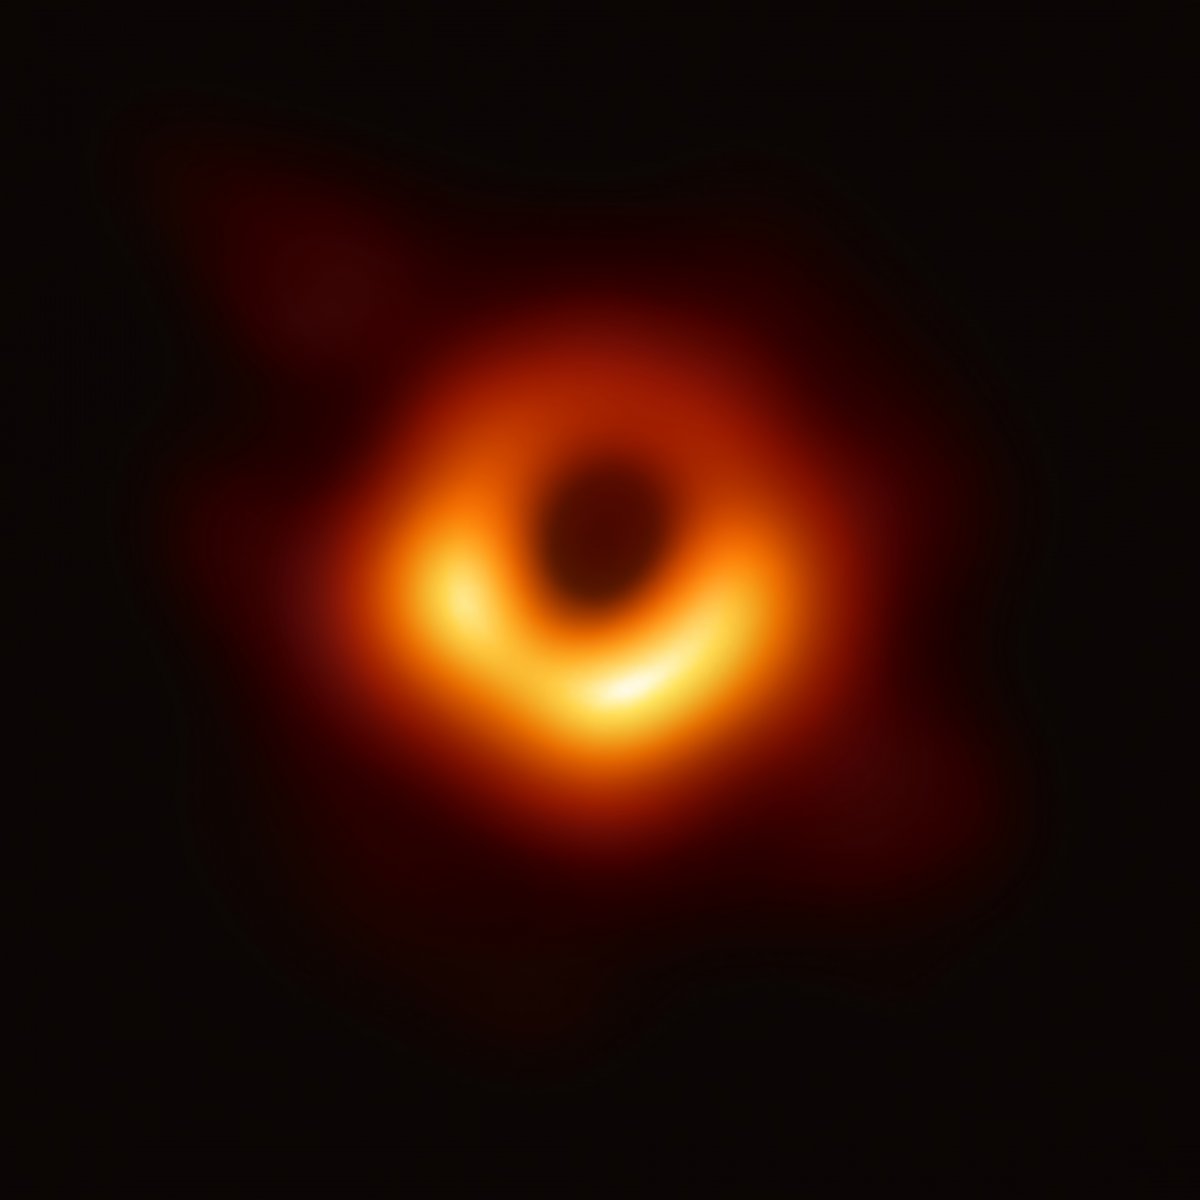 https://commons.wikimedia.org/wiki/File:Black_hole_-_Messier_87_crop_max_res.jpg